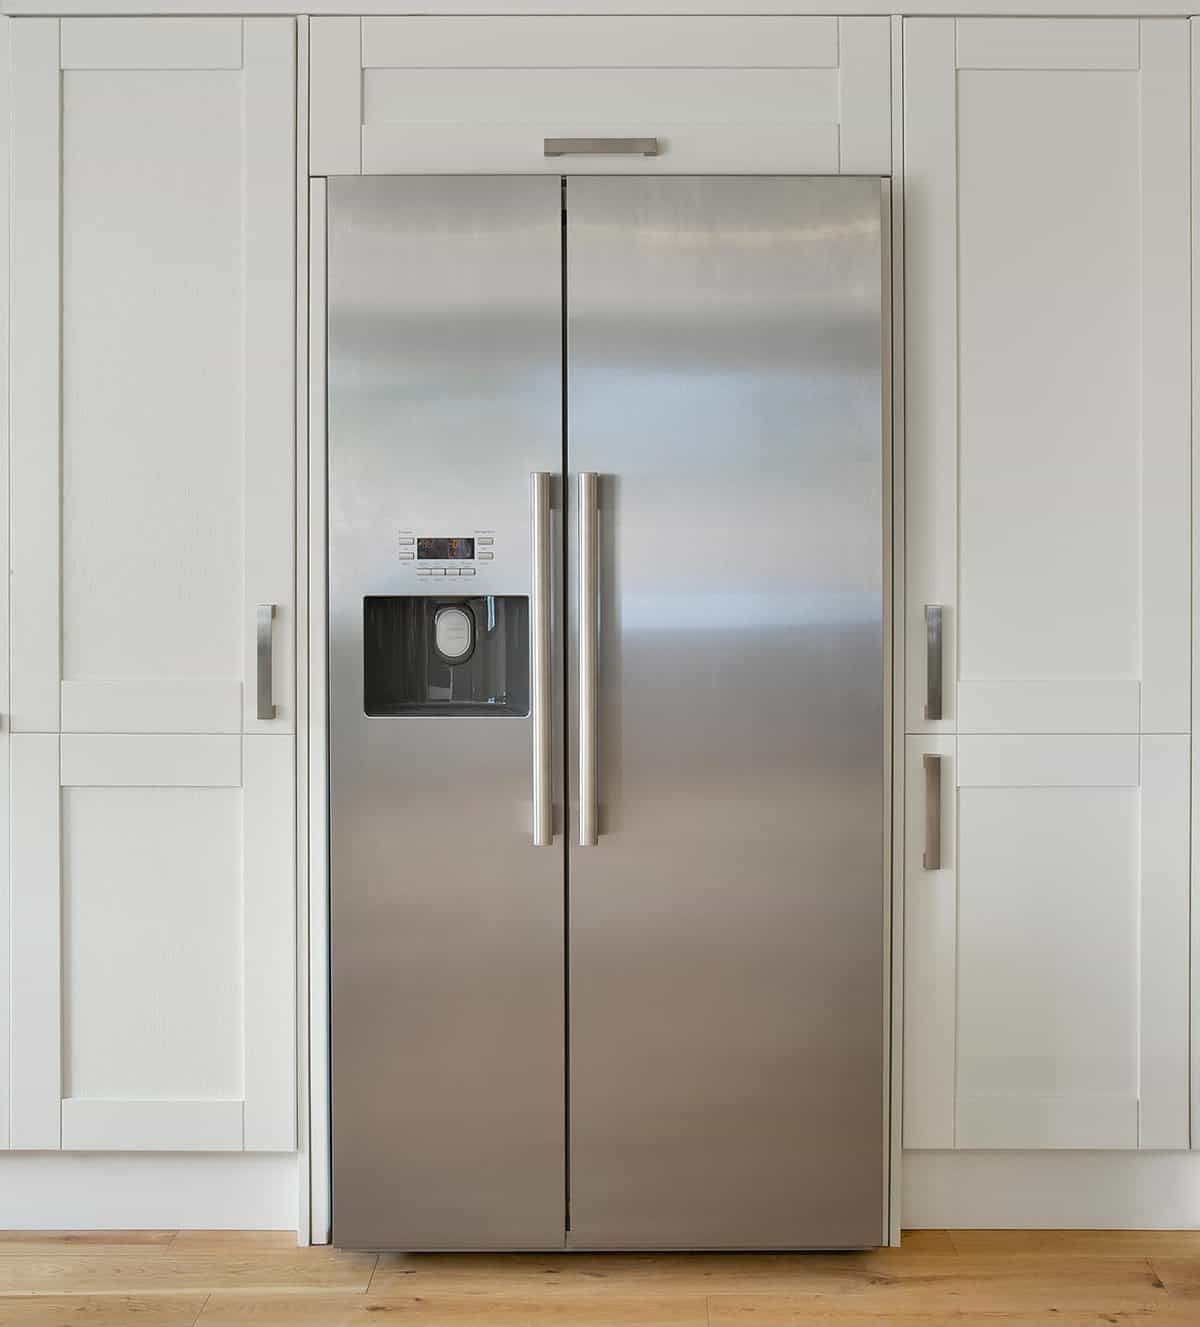 American fridge freezer set into a bank of cream coloured cupboards in a farmhouse-style kitchen